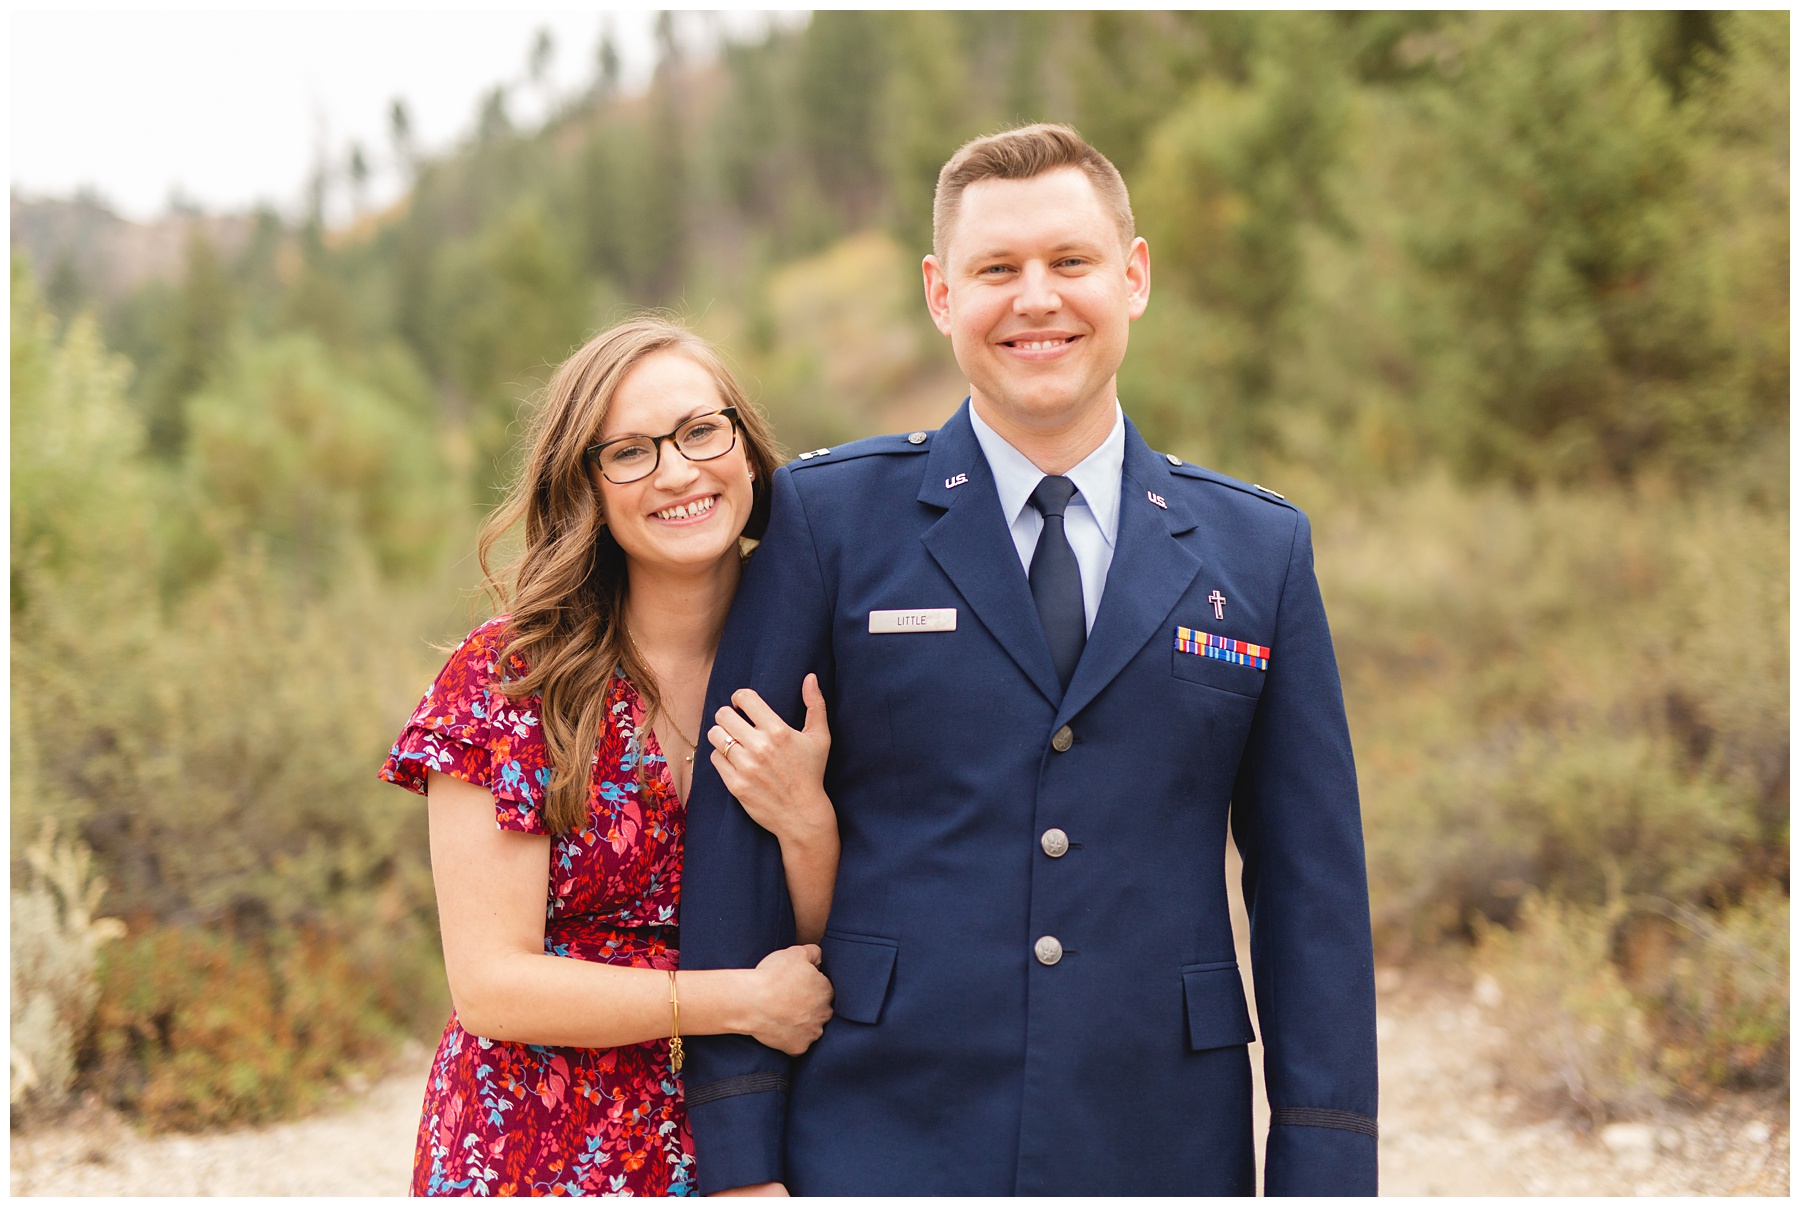 man in united states air force blues looking at camera smiling with wife on his arm. Photo by Miranda Renee Photography